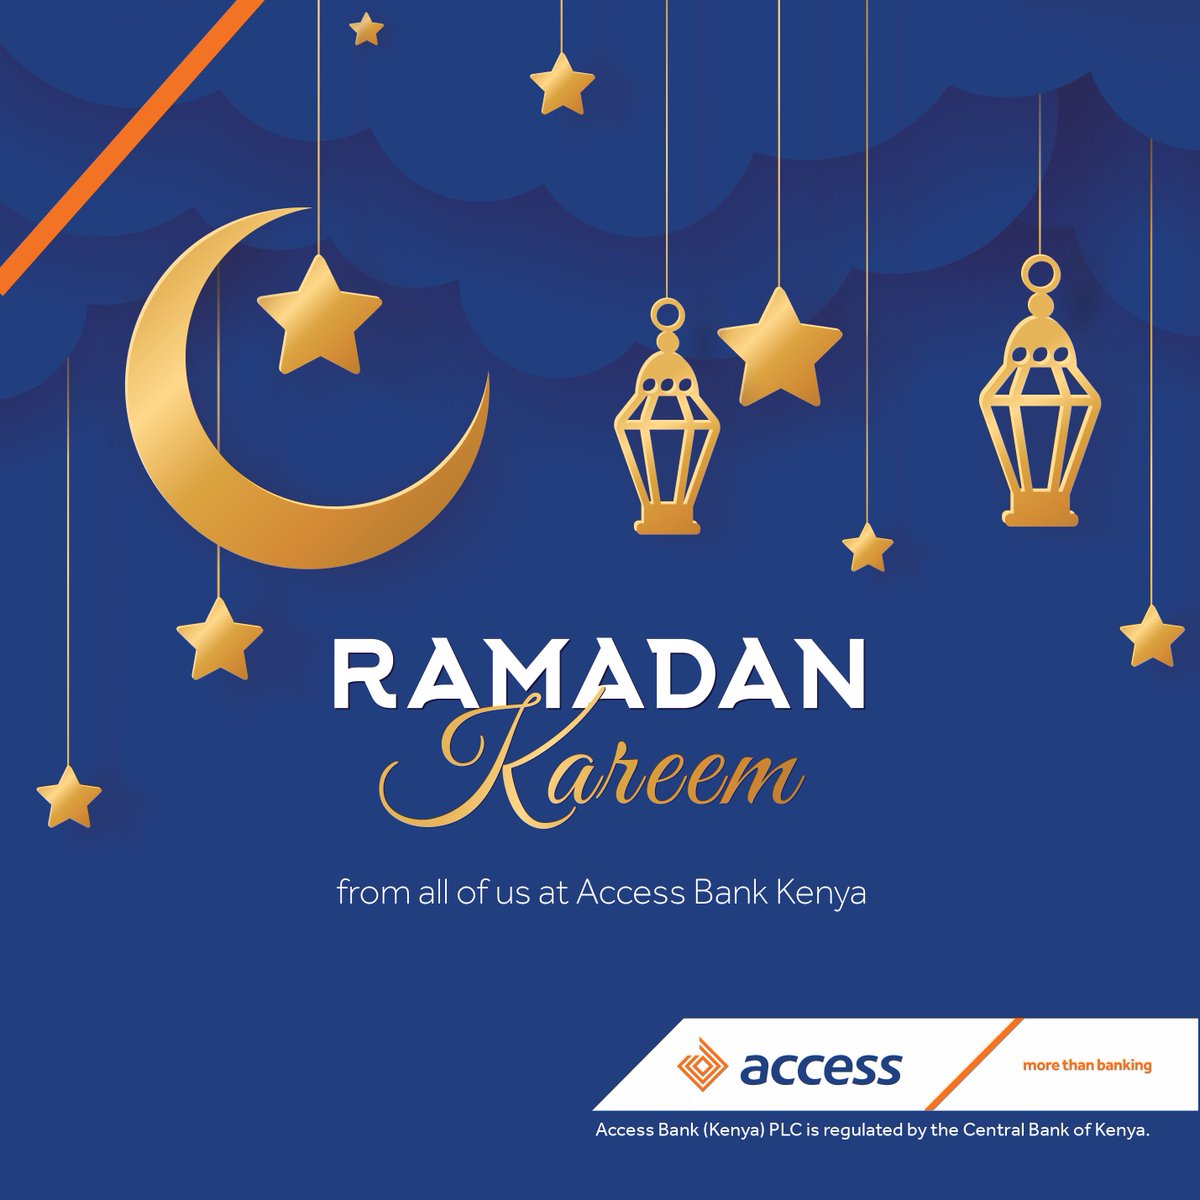 May the Holy Month be filled with peace, reflection, and generosity.
From all of us at Access Bank Kenya.

#AccessMore #Accesscares #ramadankareem